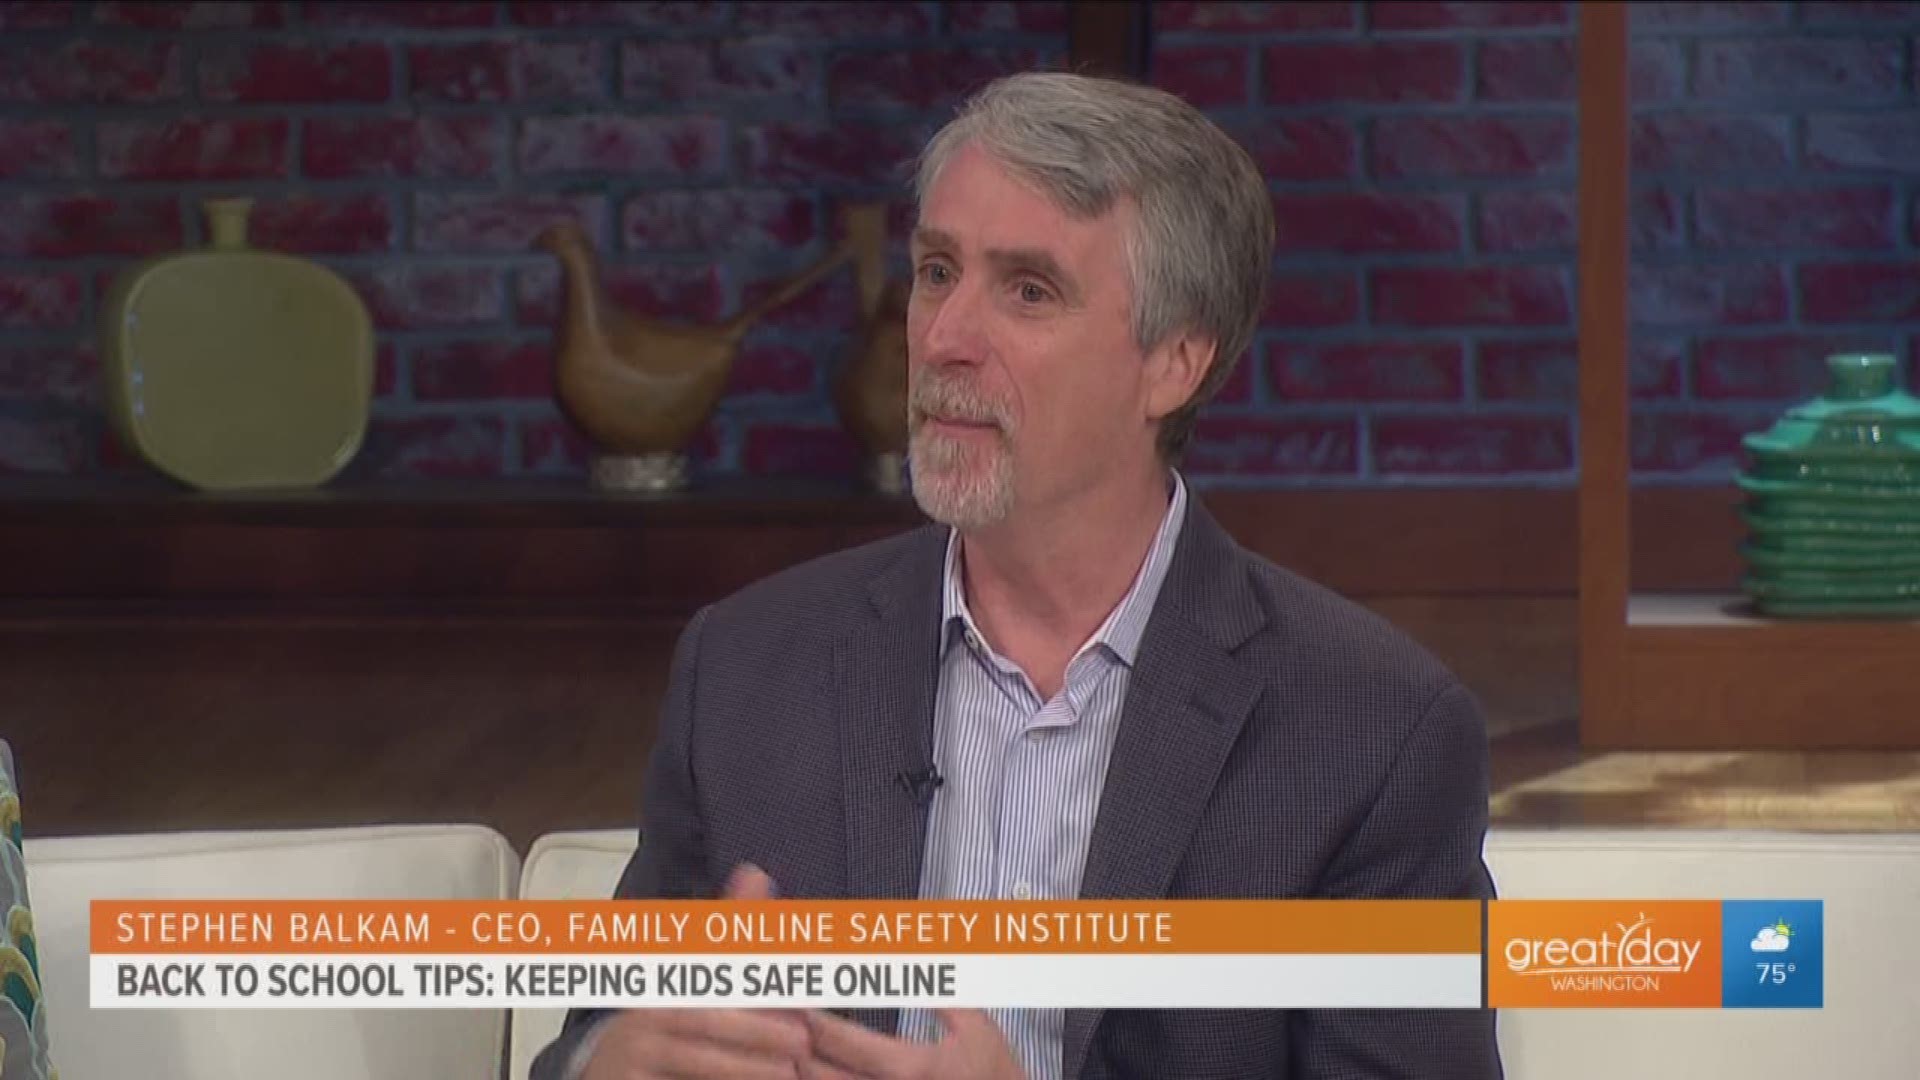 Stephen Balkam, CEO of the Family Online Safety Institute gives some tips on how to keep kids safe online during the back-to-school season. He says talk to your kids, be a good digital role model and learn how to monitor their activity. 